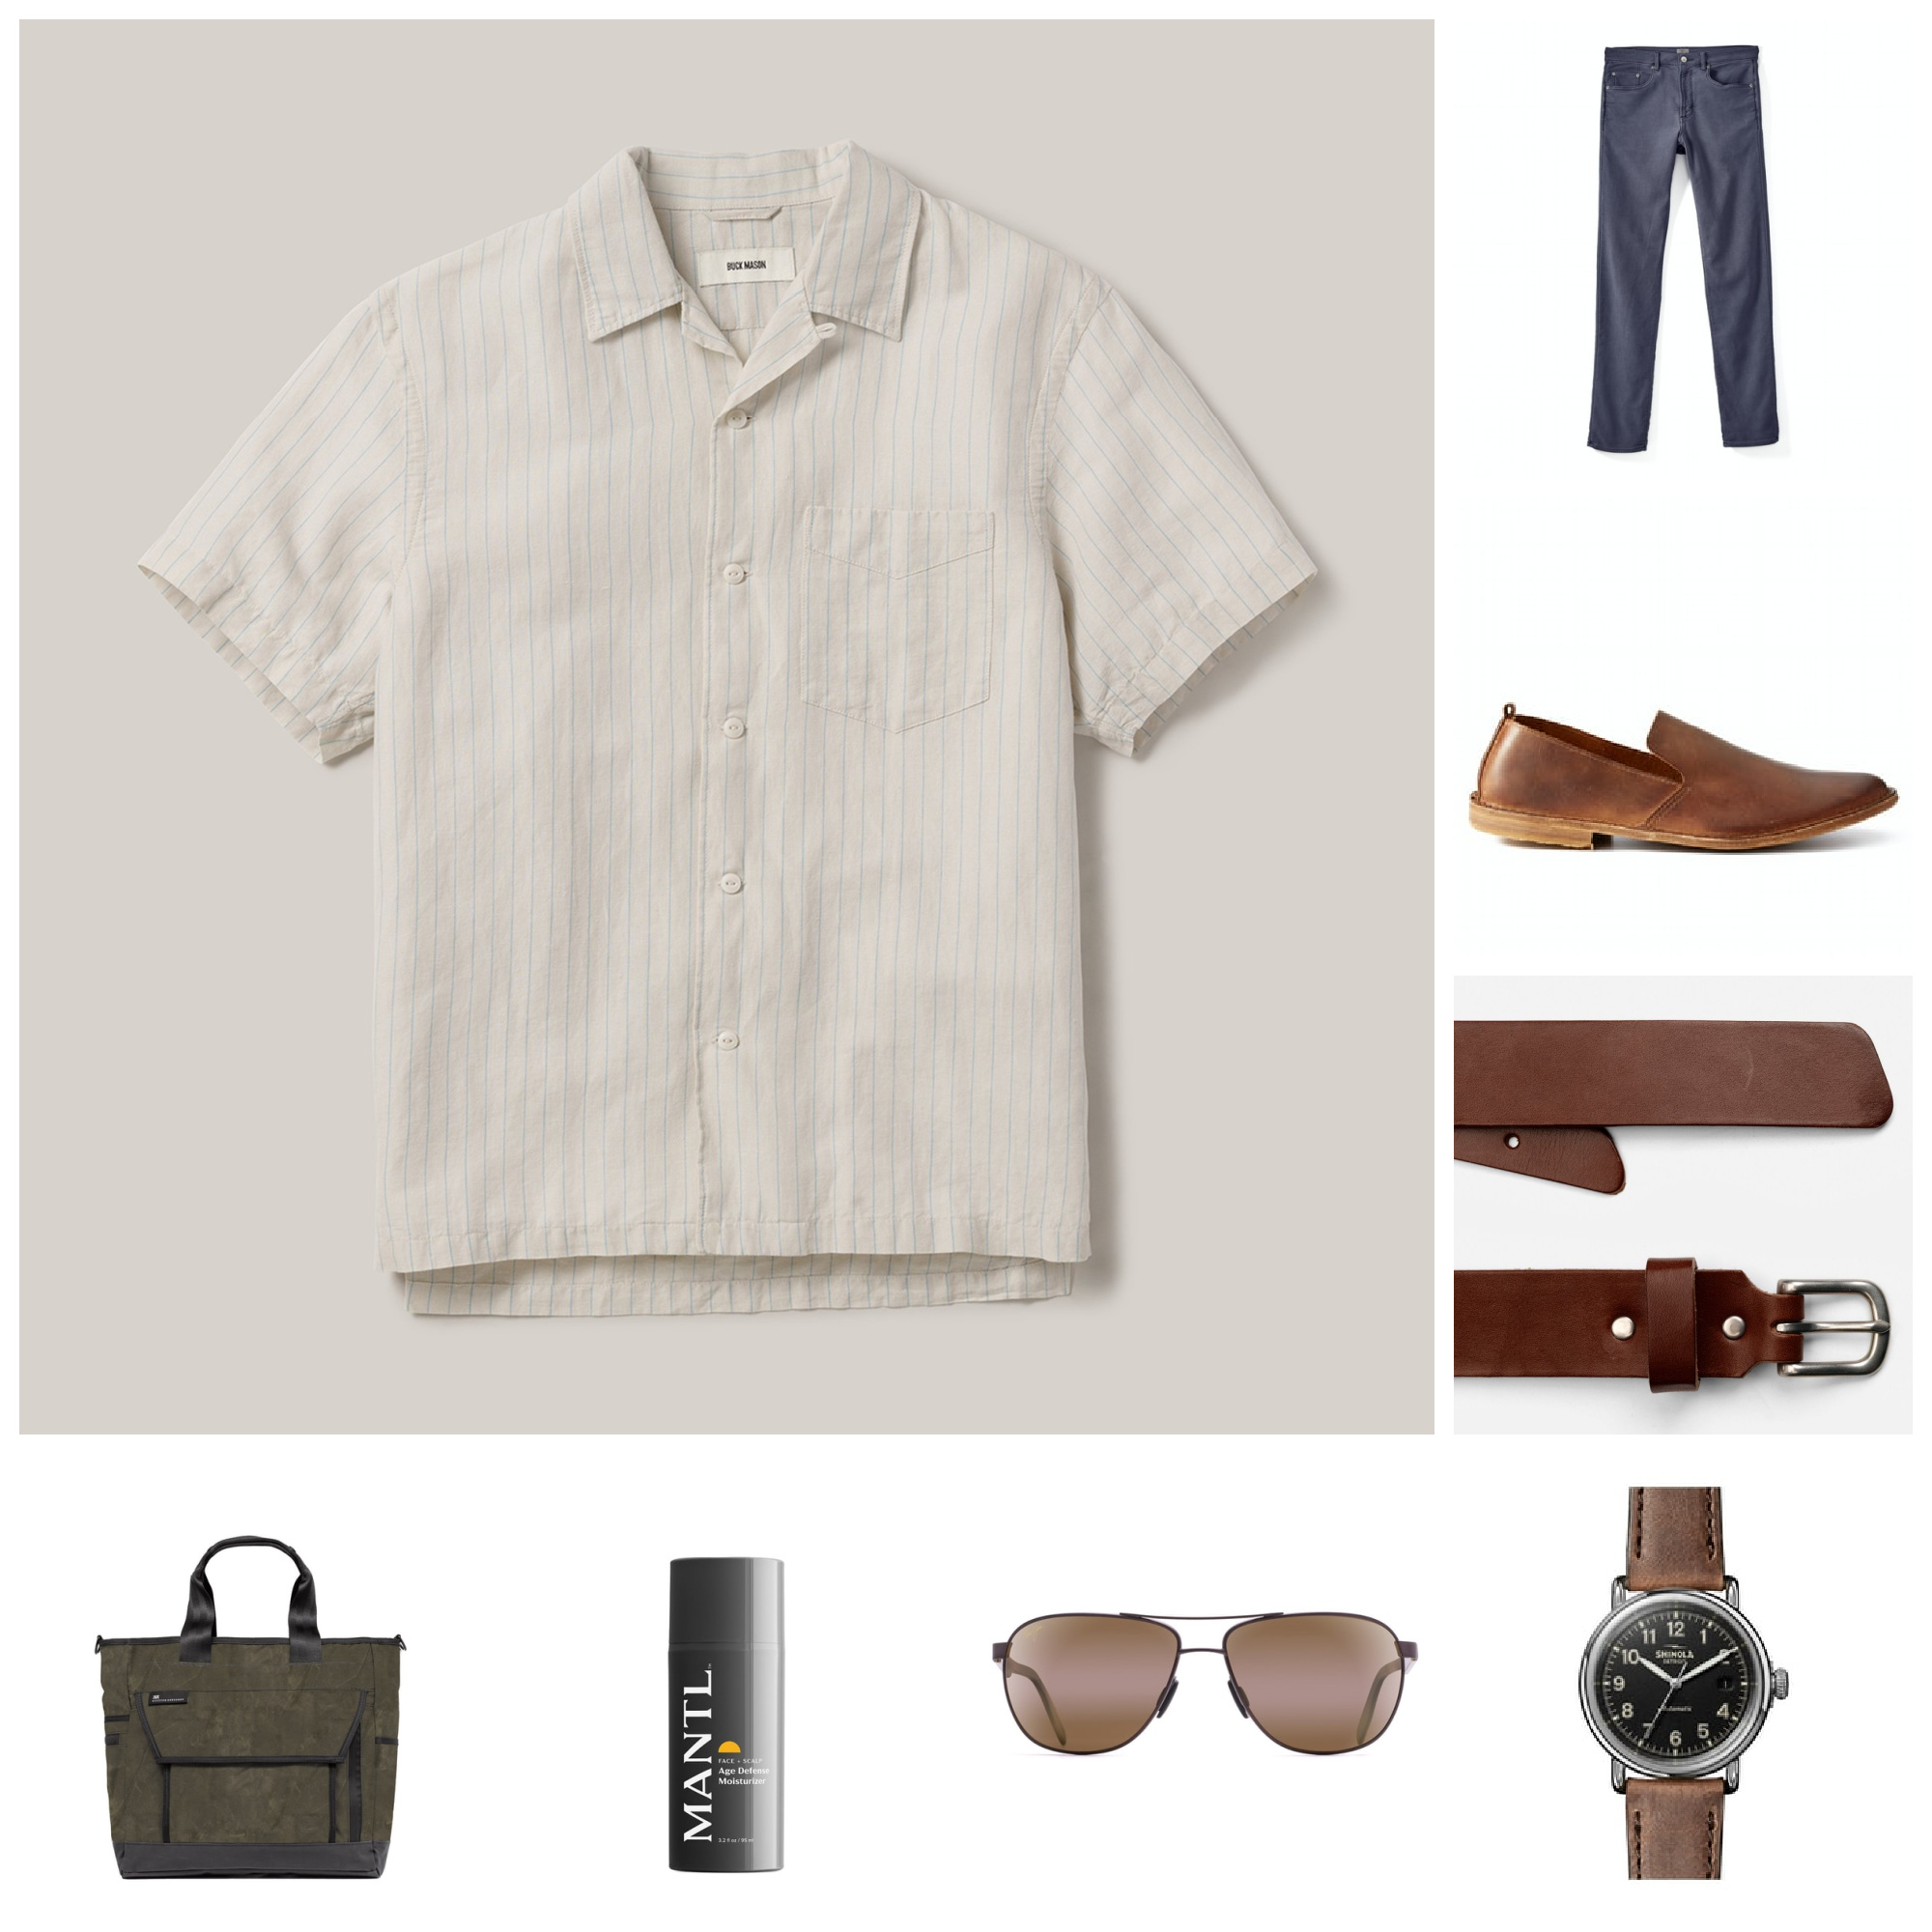 #OOTD: How to Wear a Camp Collar Shirt This Summer | The Style Guide